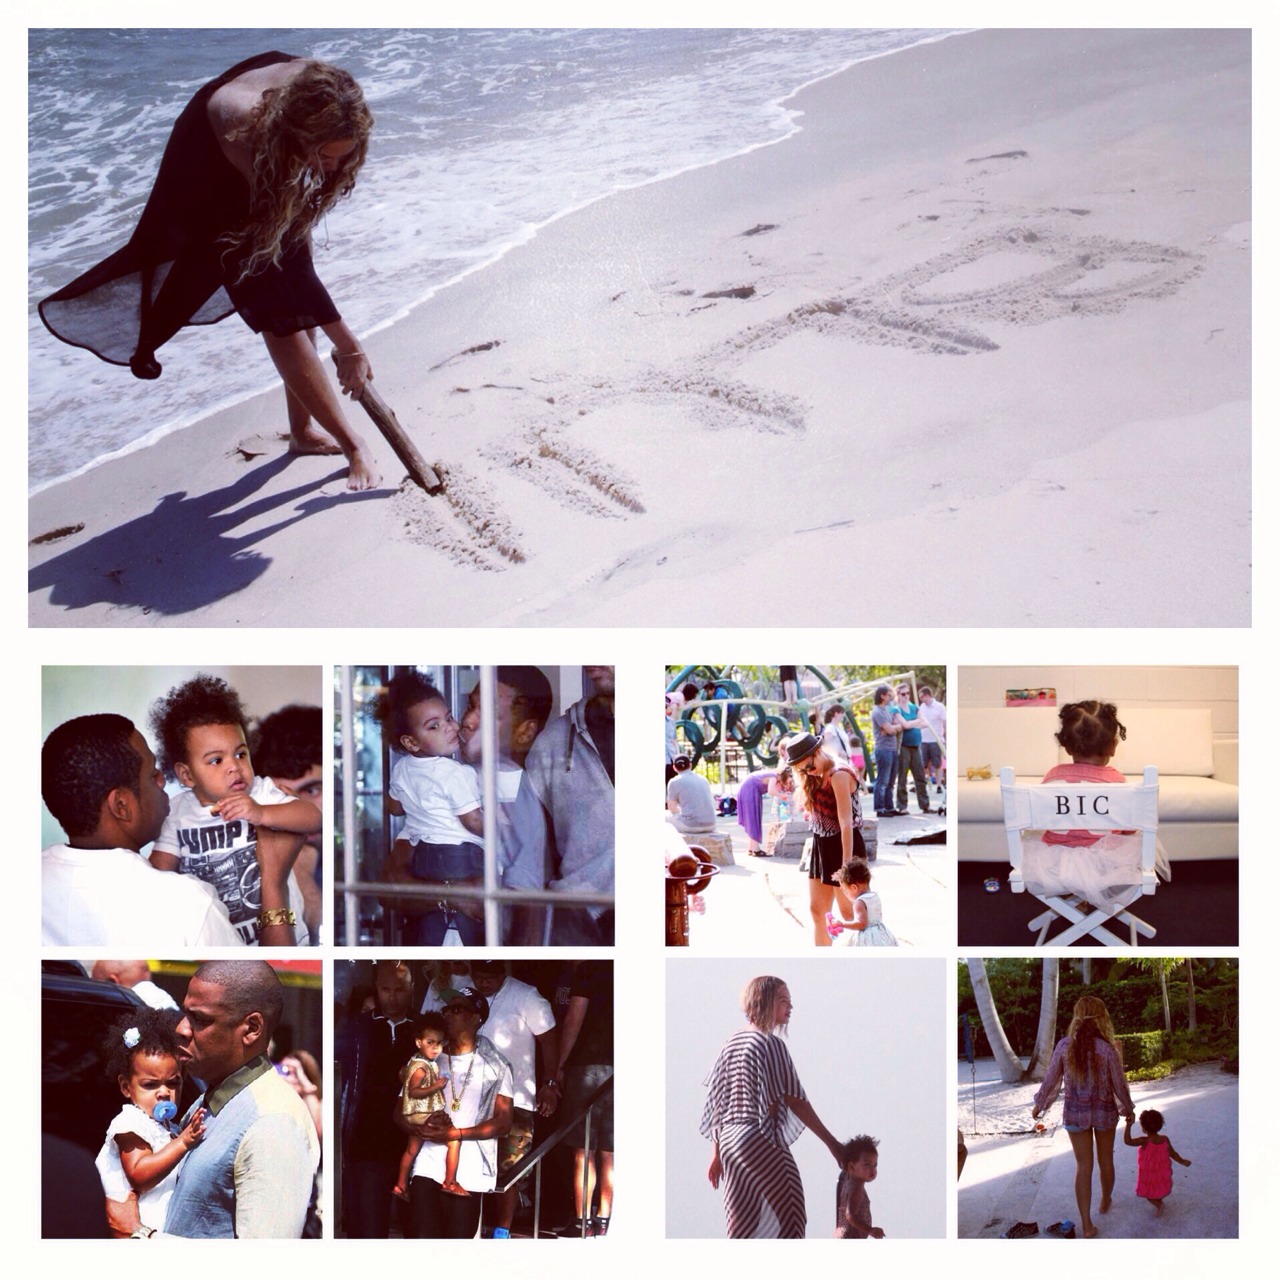 Beyoncé Commemorates Blue Ivy's 2nd Birthday with Fan Tumblr Blog1280 x 1280